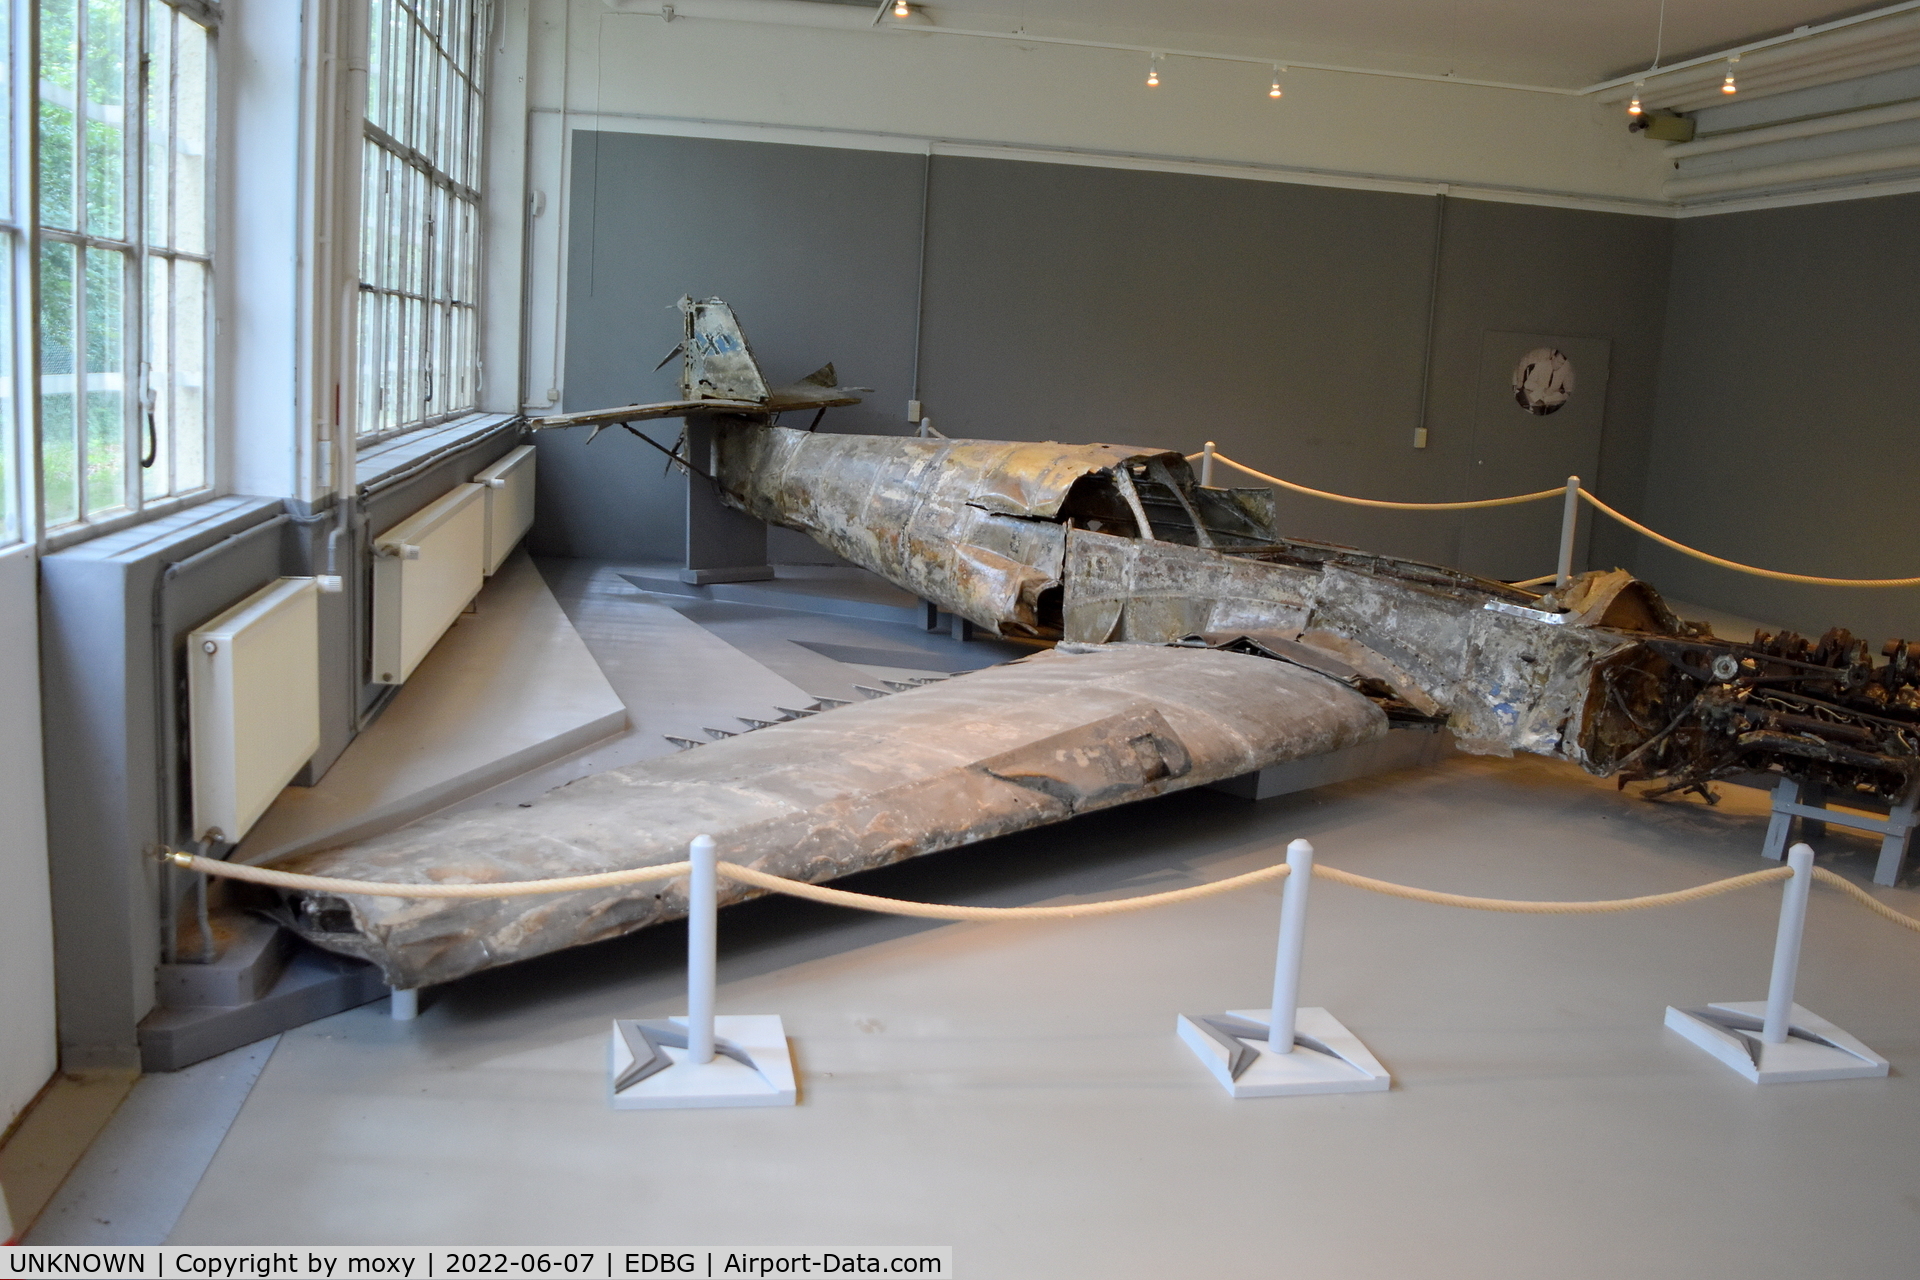 UNKNOWN, 2018 RS Helikopter VA 115 C/N 001, Wreckage of Messerschmidt BF-108 Taifun which crashed on Rugen in World II. Can be seen at the Bundeswehr Museum of Military History – Berlin-Gatow Airfield.